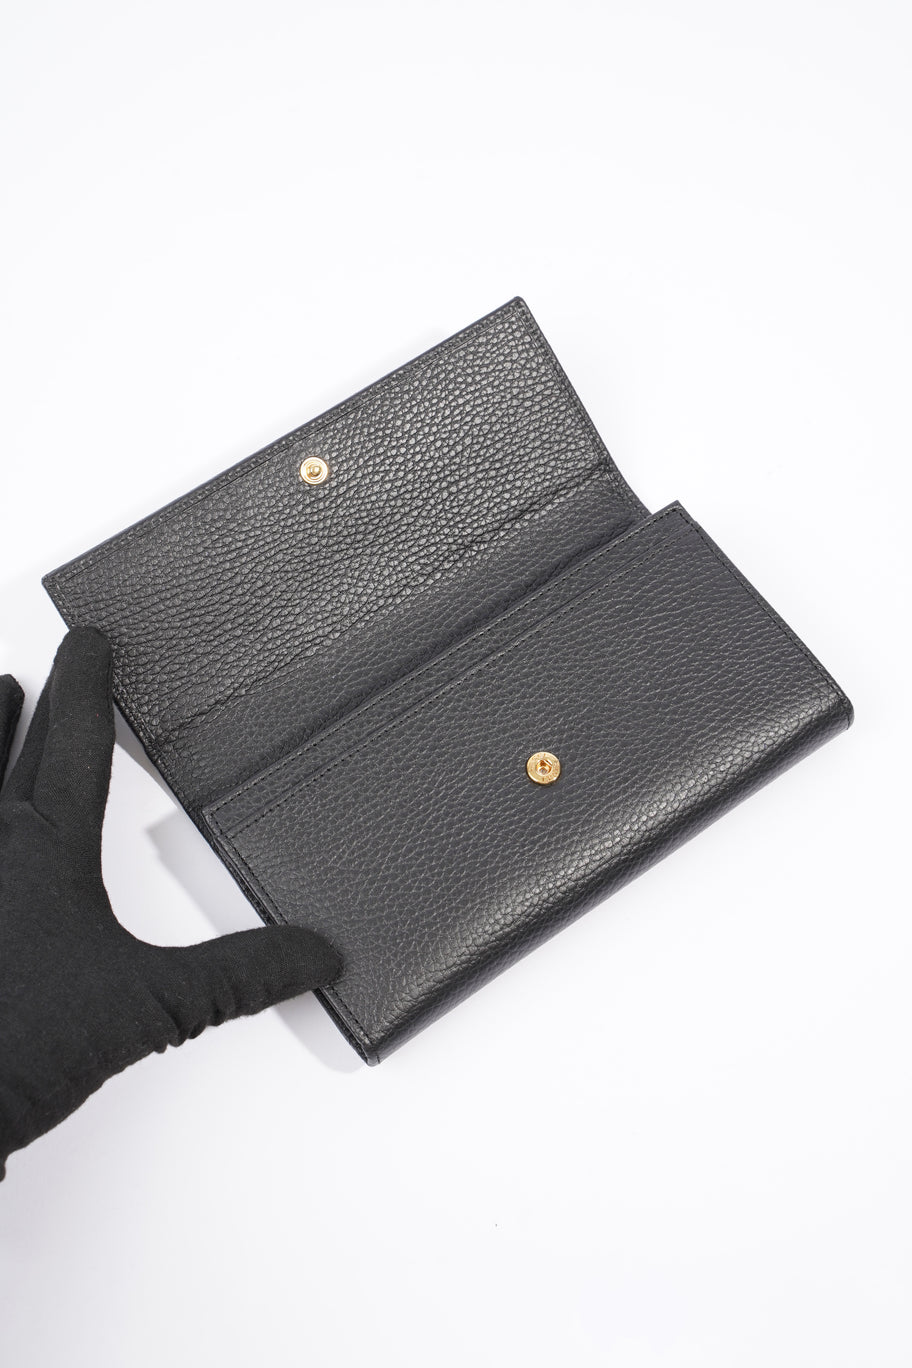 GG Marmont Long Wallet Black Calfskin Leather Image 6